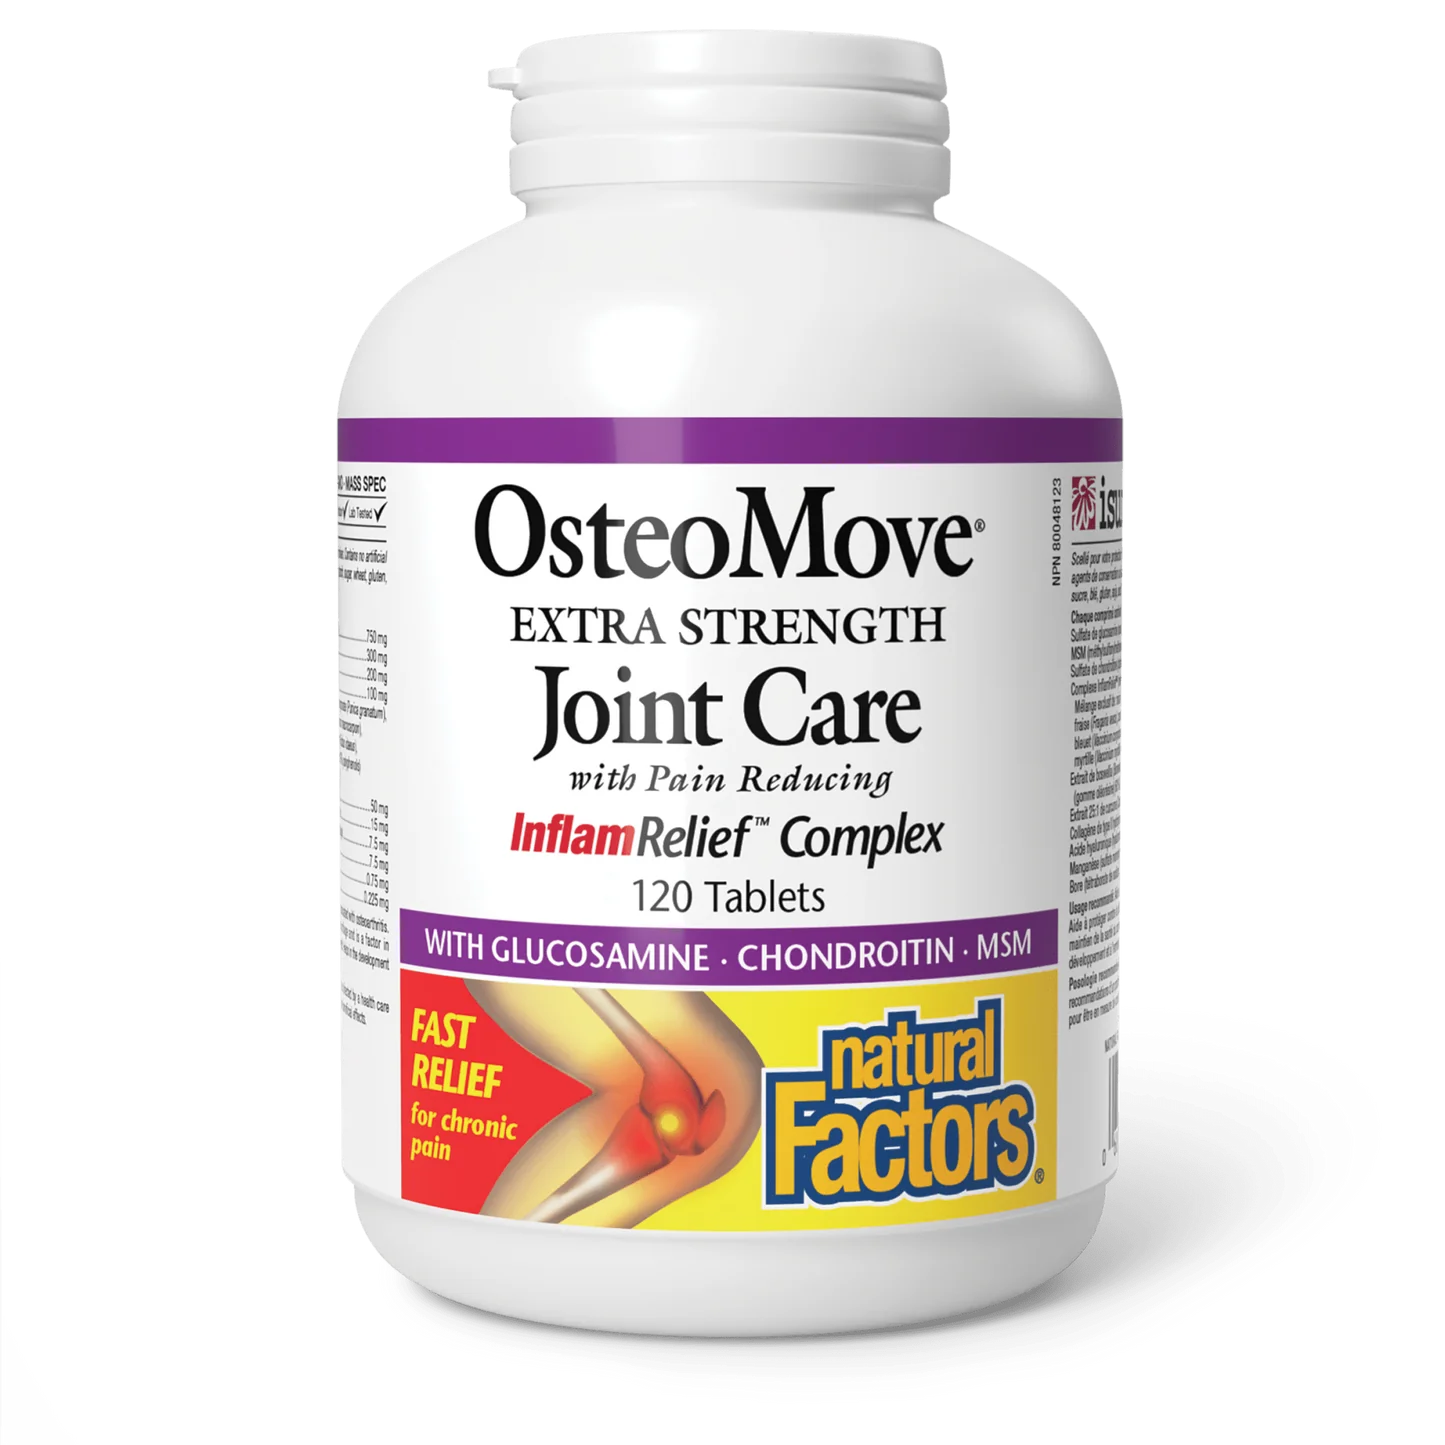 Natural Factors OsteoMove Joint Care Extra Strength